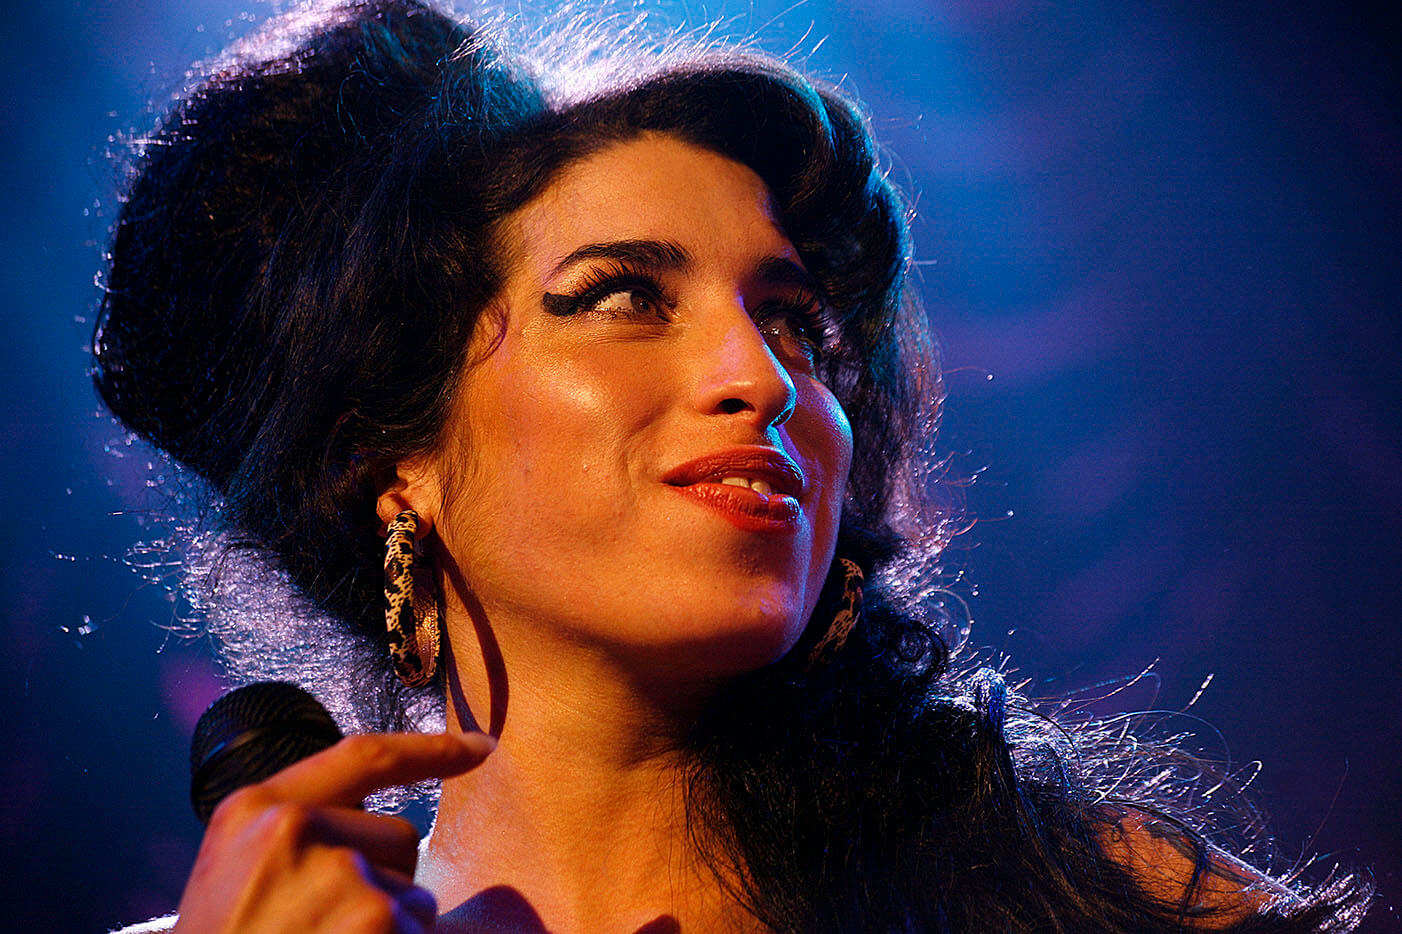 Amy Winehouse - By Chris Christoforou - High Res Web Image